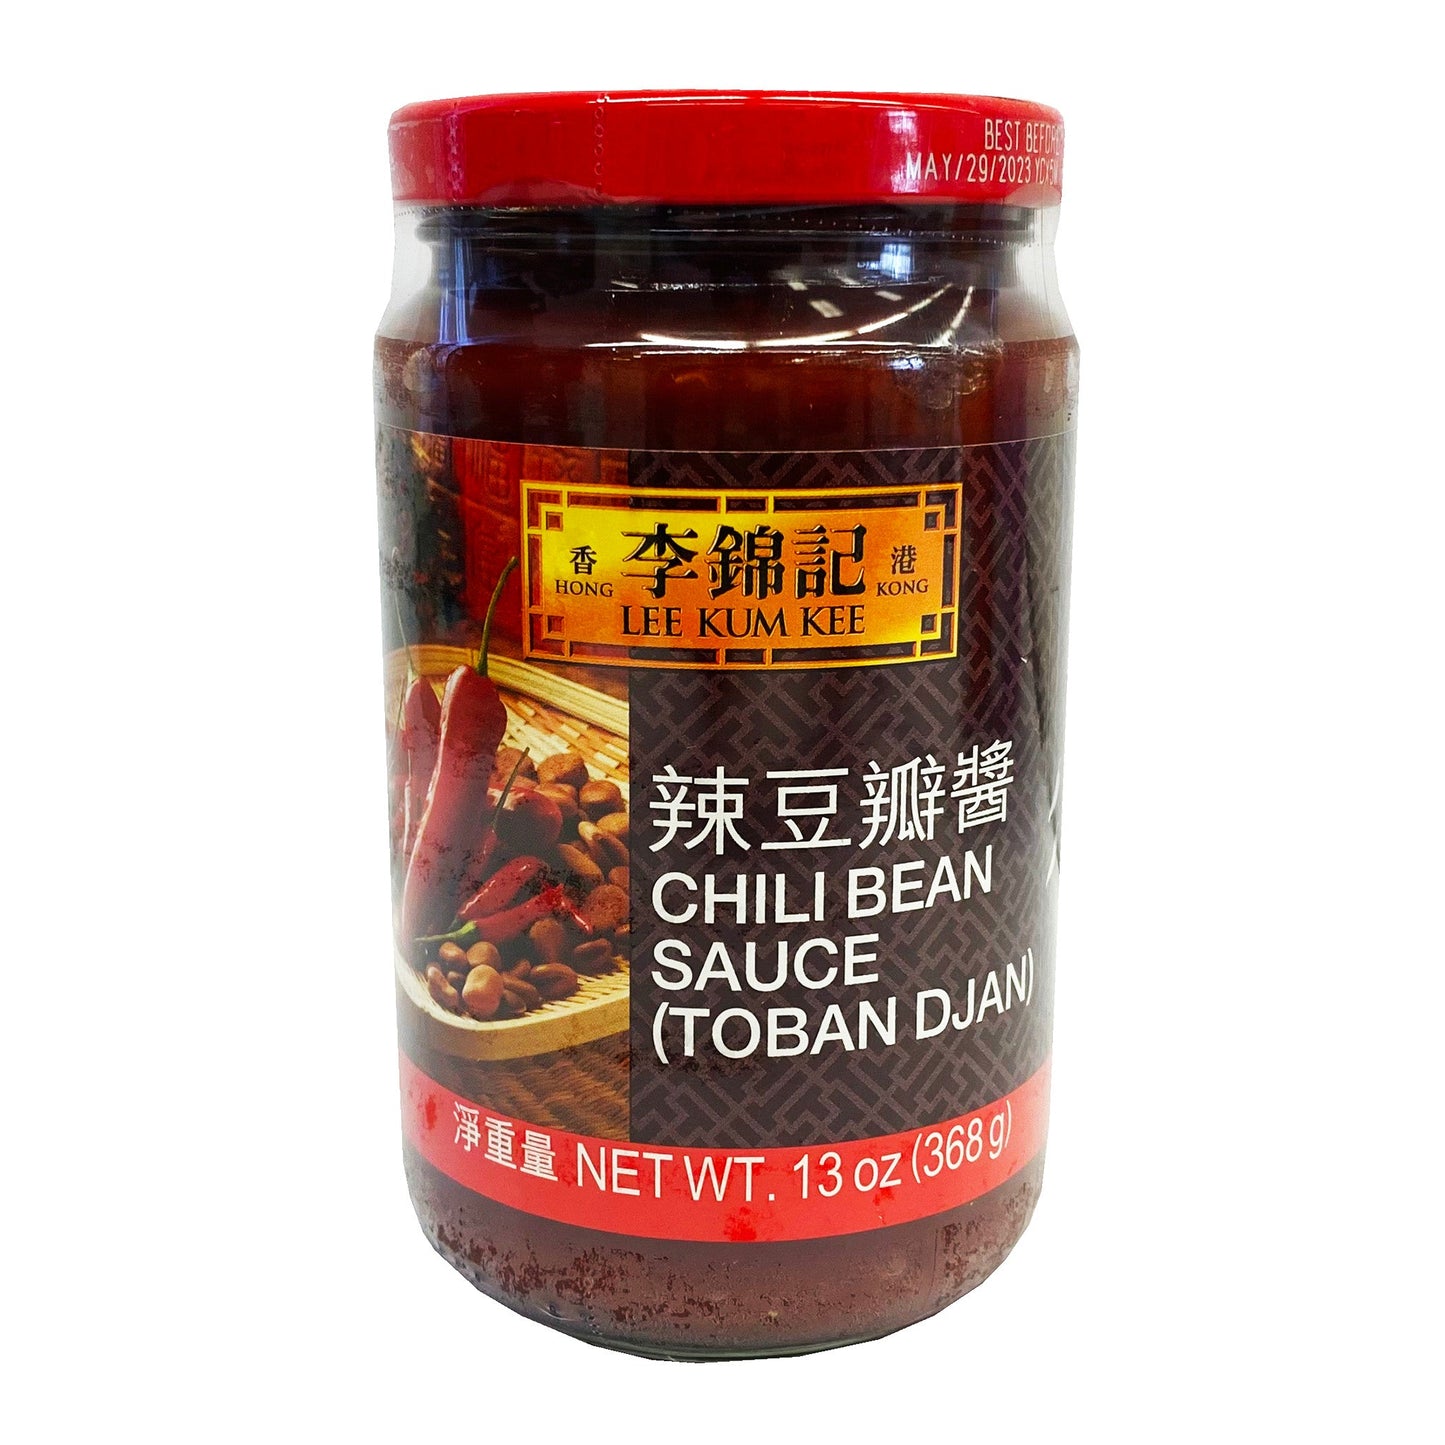 Front graphic image of Lee Kum Kee Chili Bean Sauce 13oz